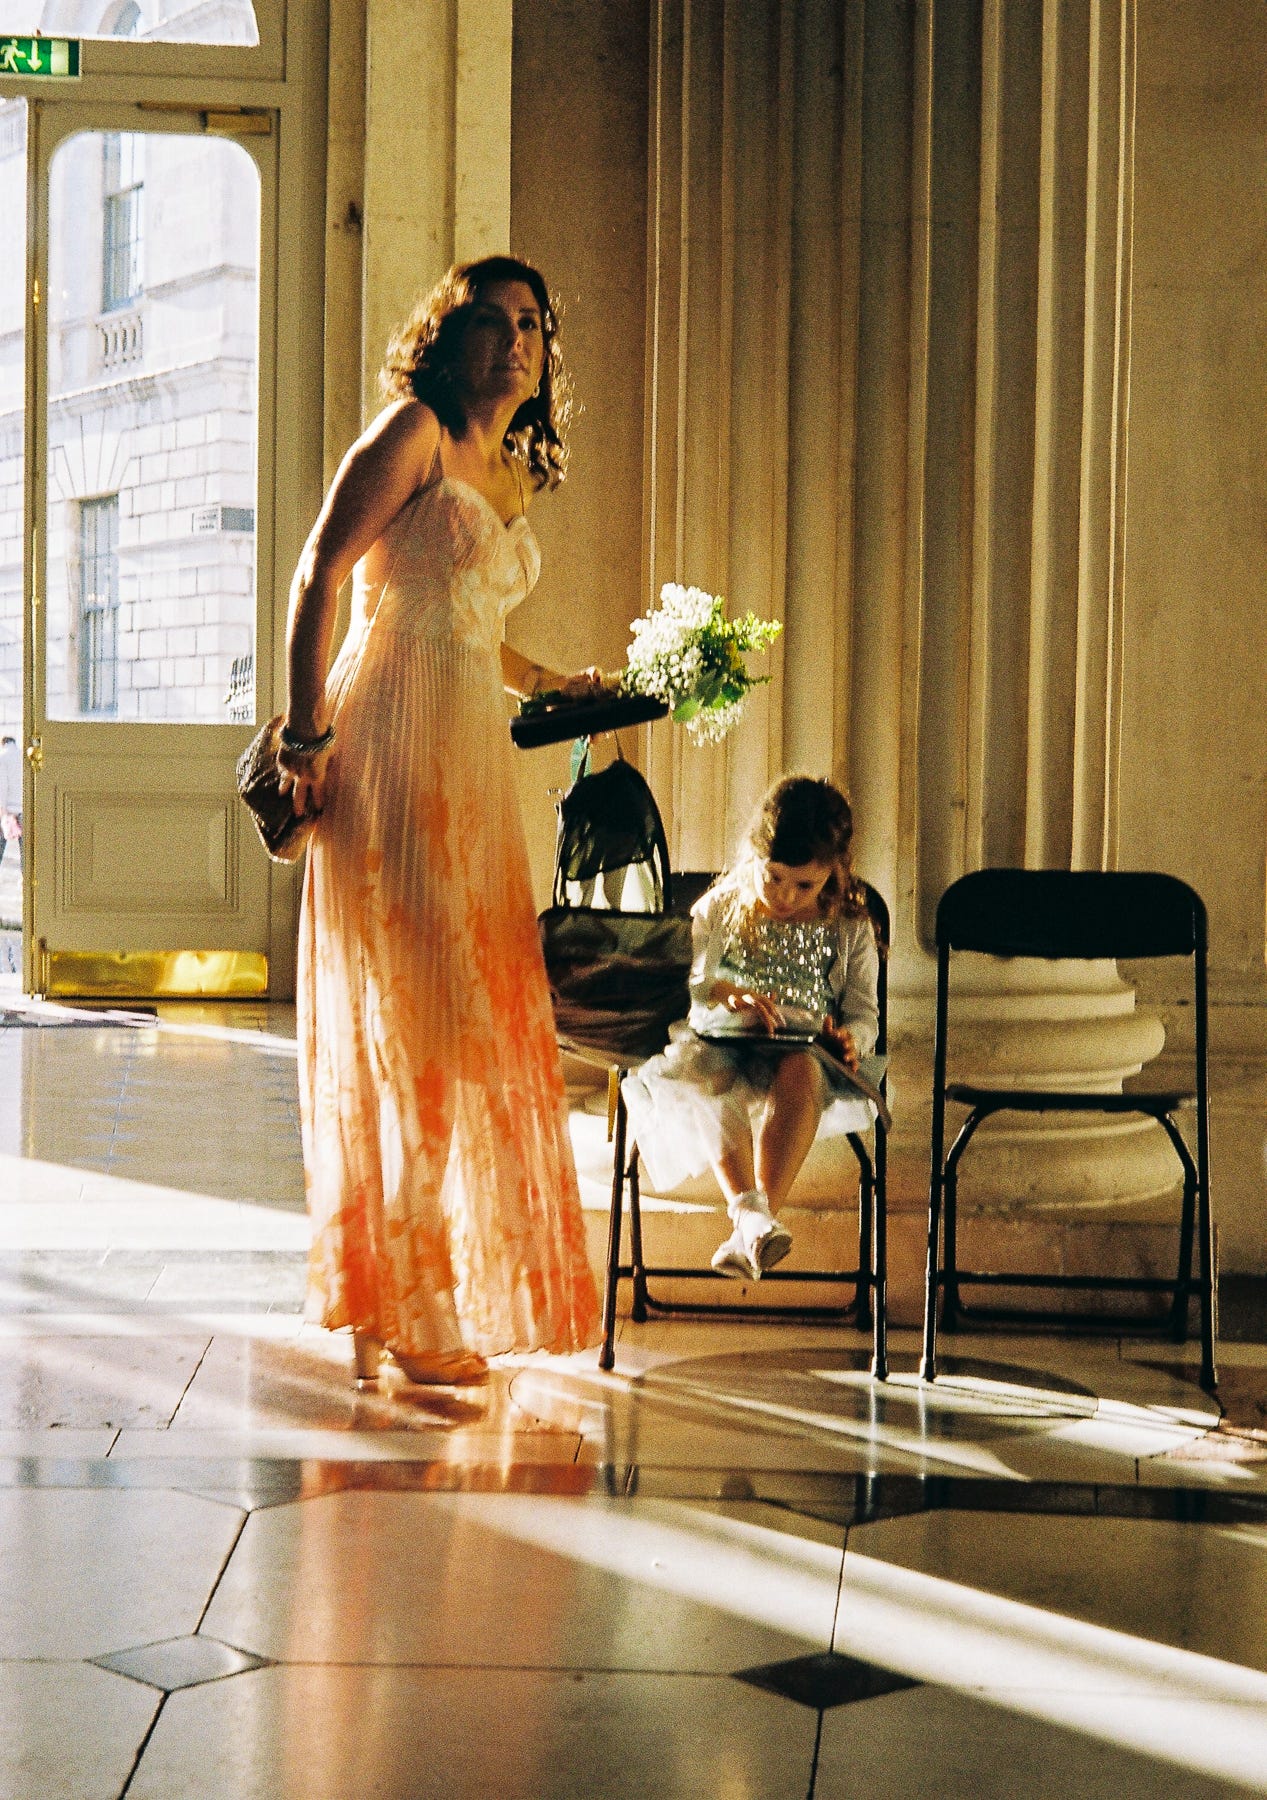 Golden light bathes a woman in a bridesmaid dress carrying a bouquet of flowers as she stand over a seated girl who is looking at a phone in a by a marble column.